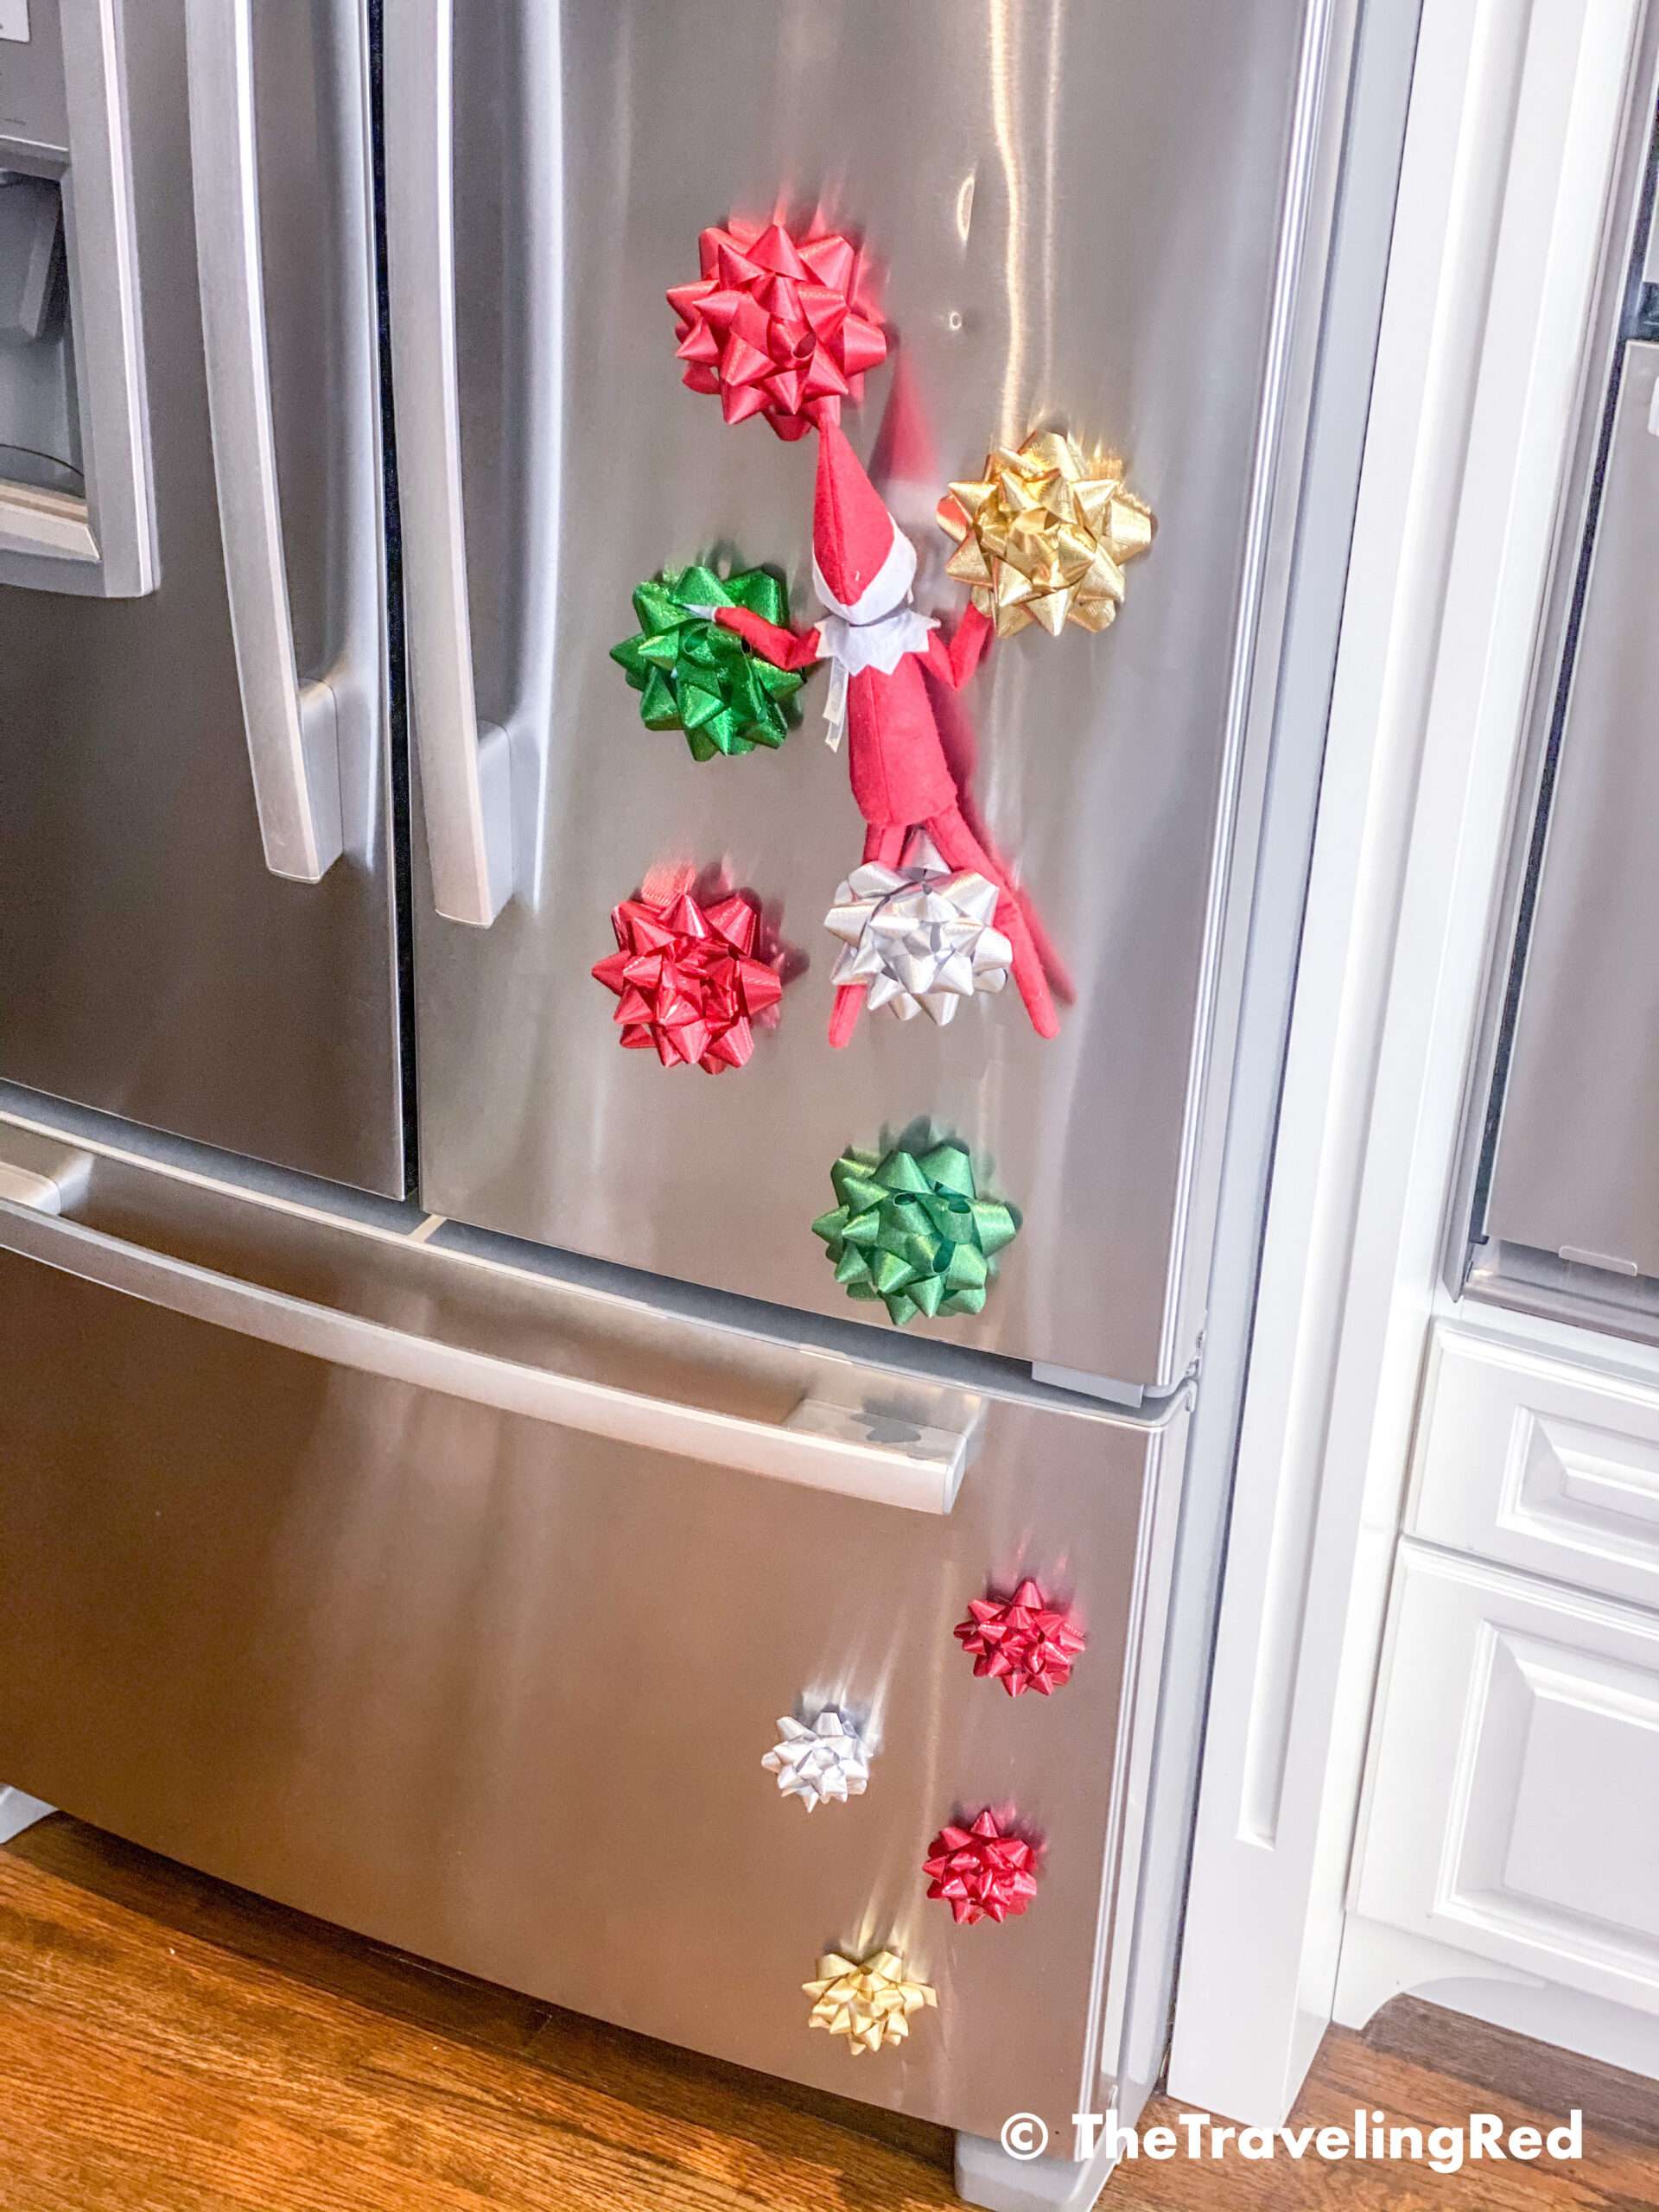 Naughty Elf on the shelf used gift bows to create a rock wall she could climb on our fridge. Fun and easy elf on the shelf ideas for a naughty elf that are quick and easy using things you have at home.